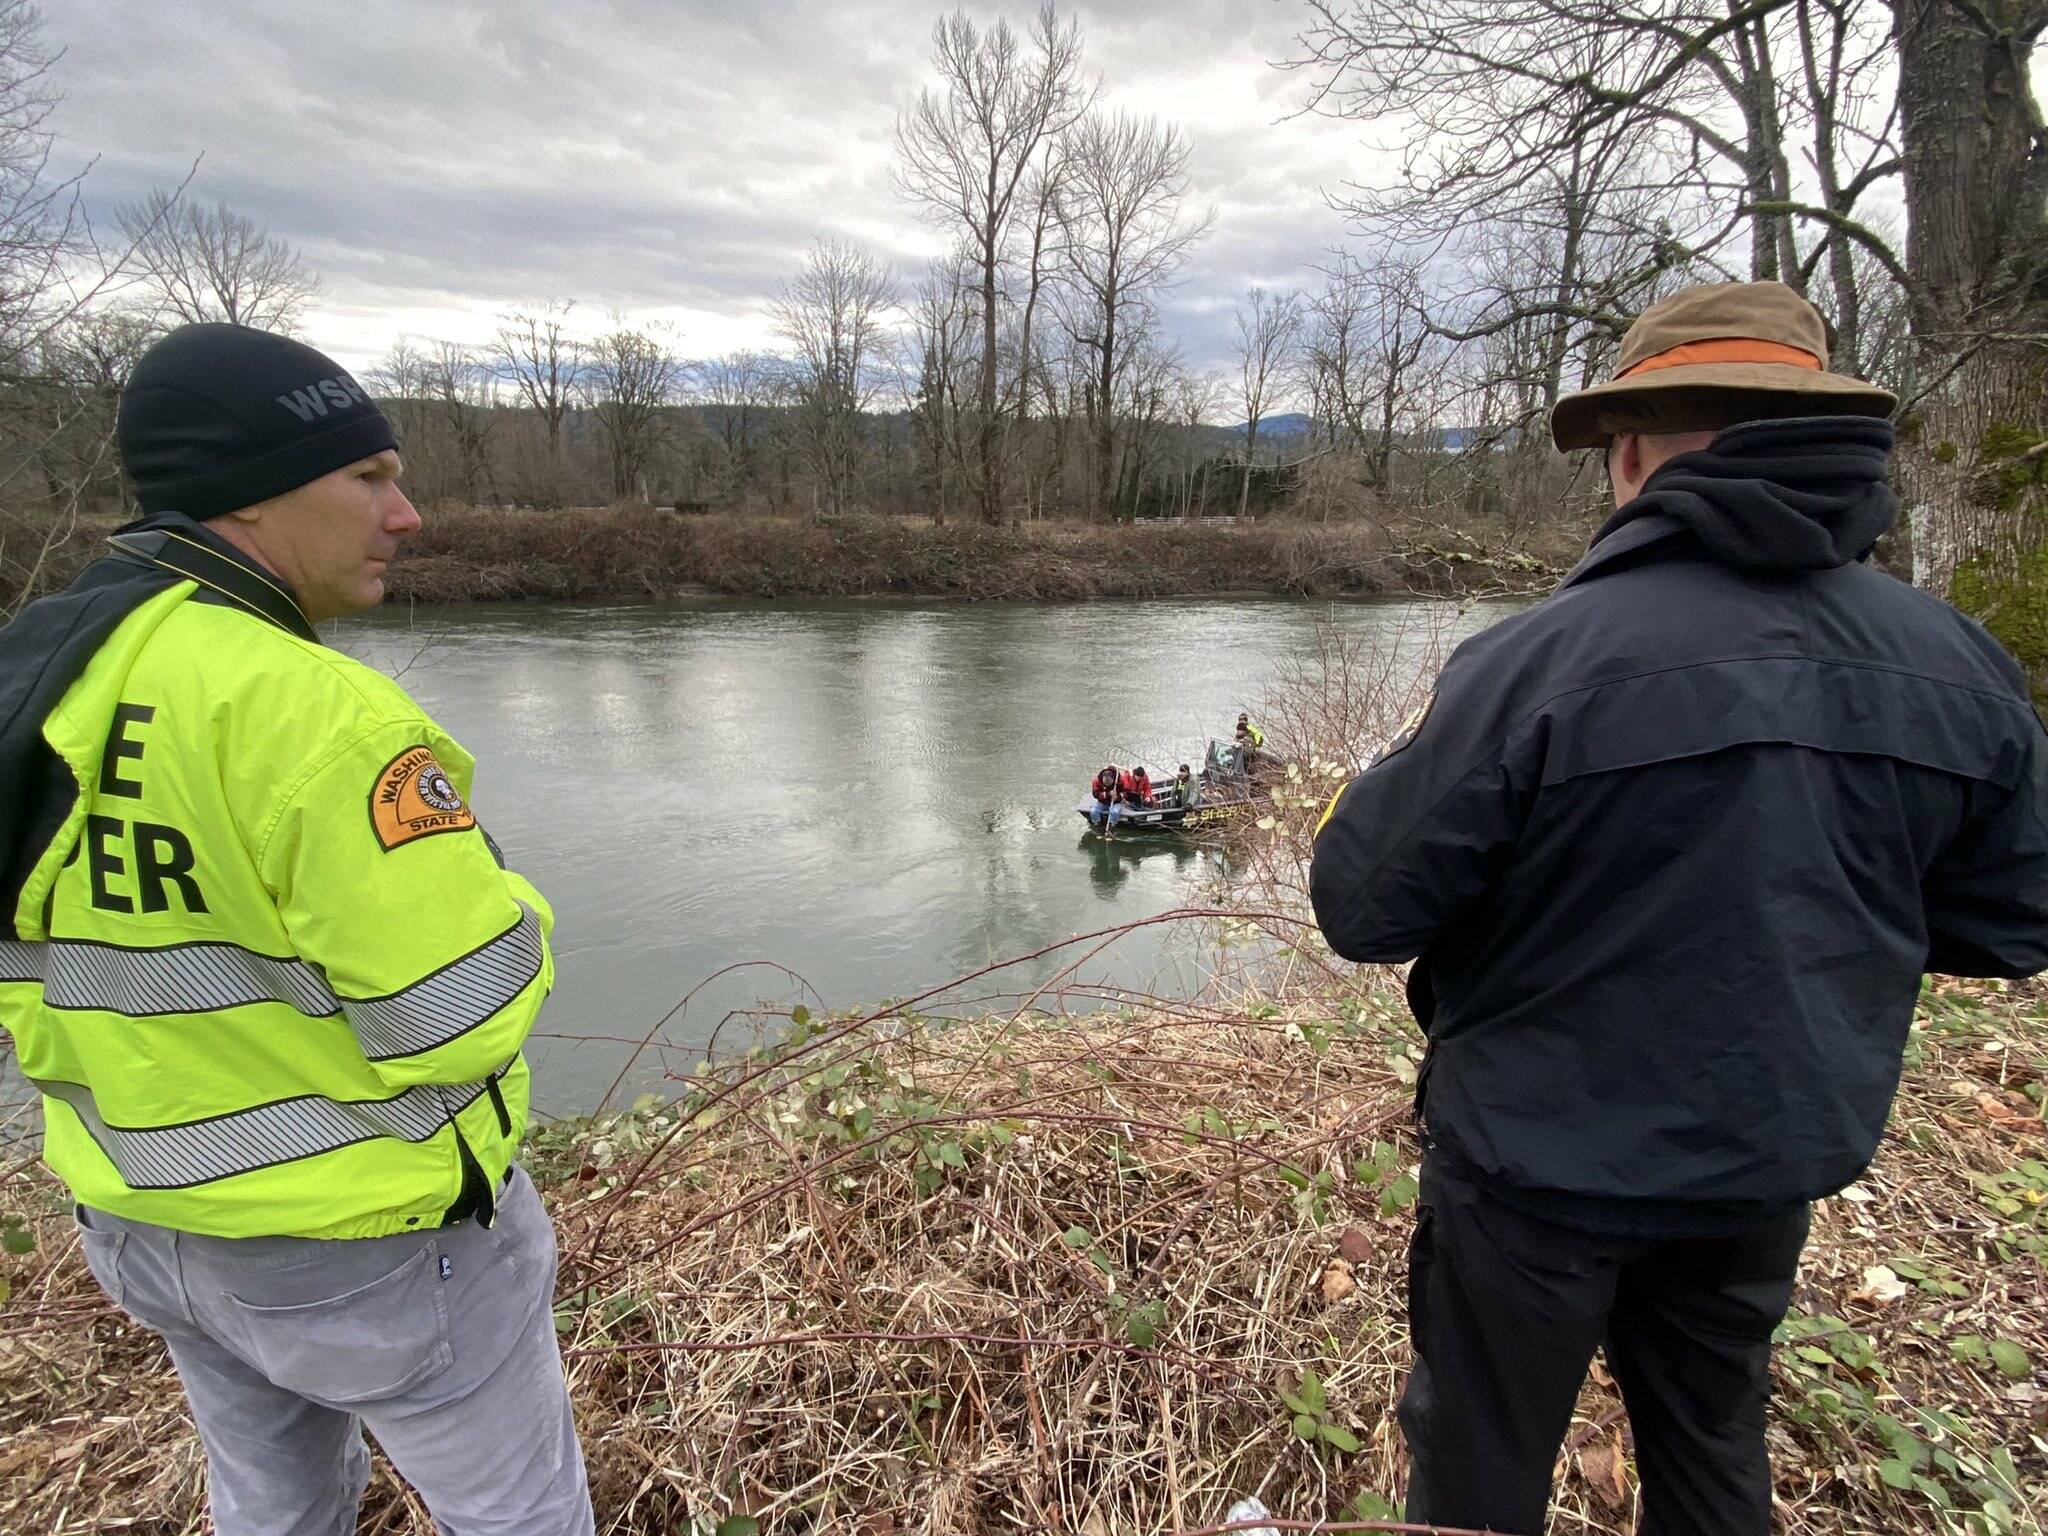 Authorities search for 6-year-old boy and woman along the Snoqualmie River near Fall City. Photo courtesy of Eastside Fire & Rescue.